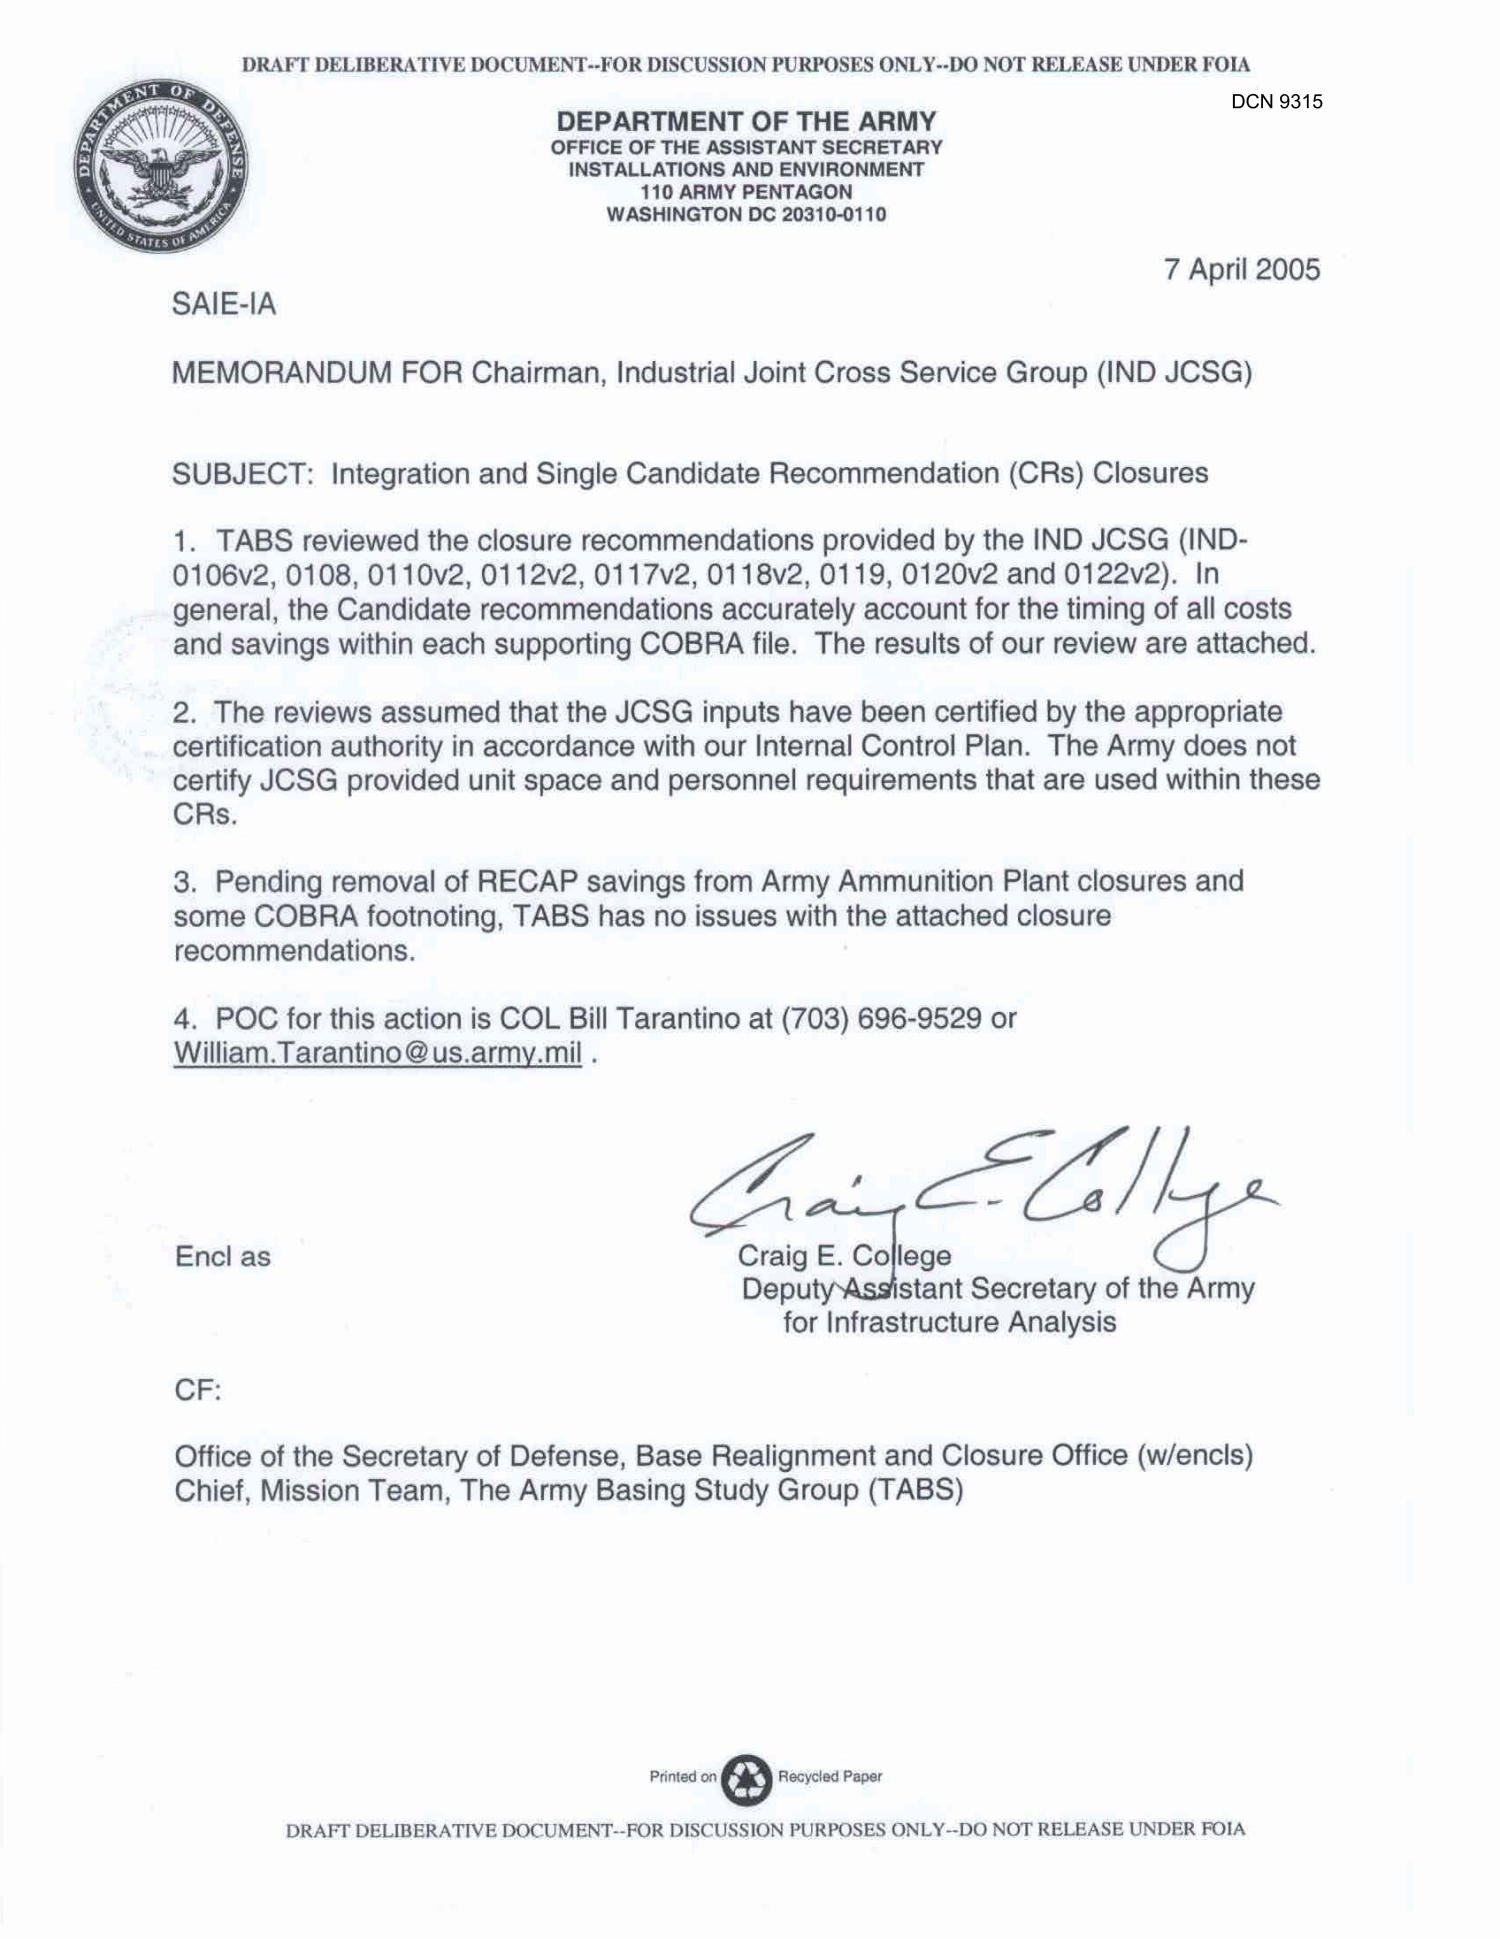 Department of the Army Memo dated 7 April 2005 for